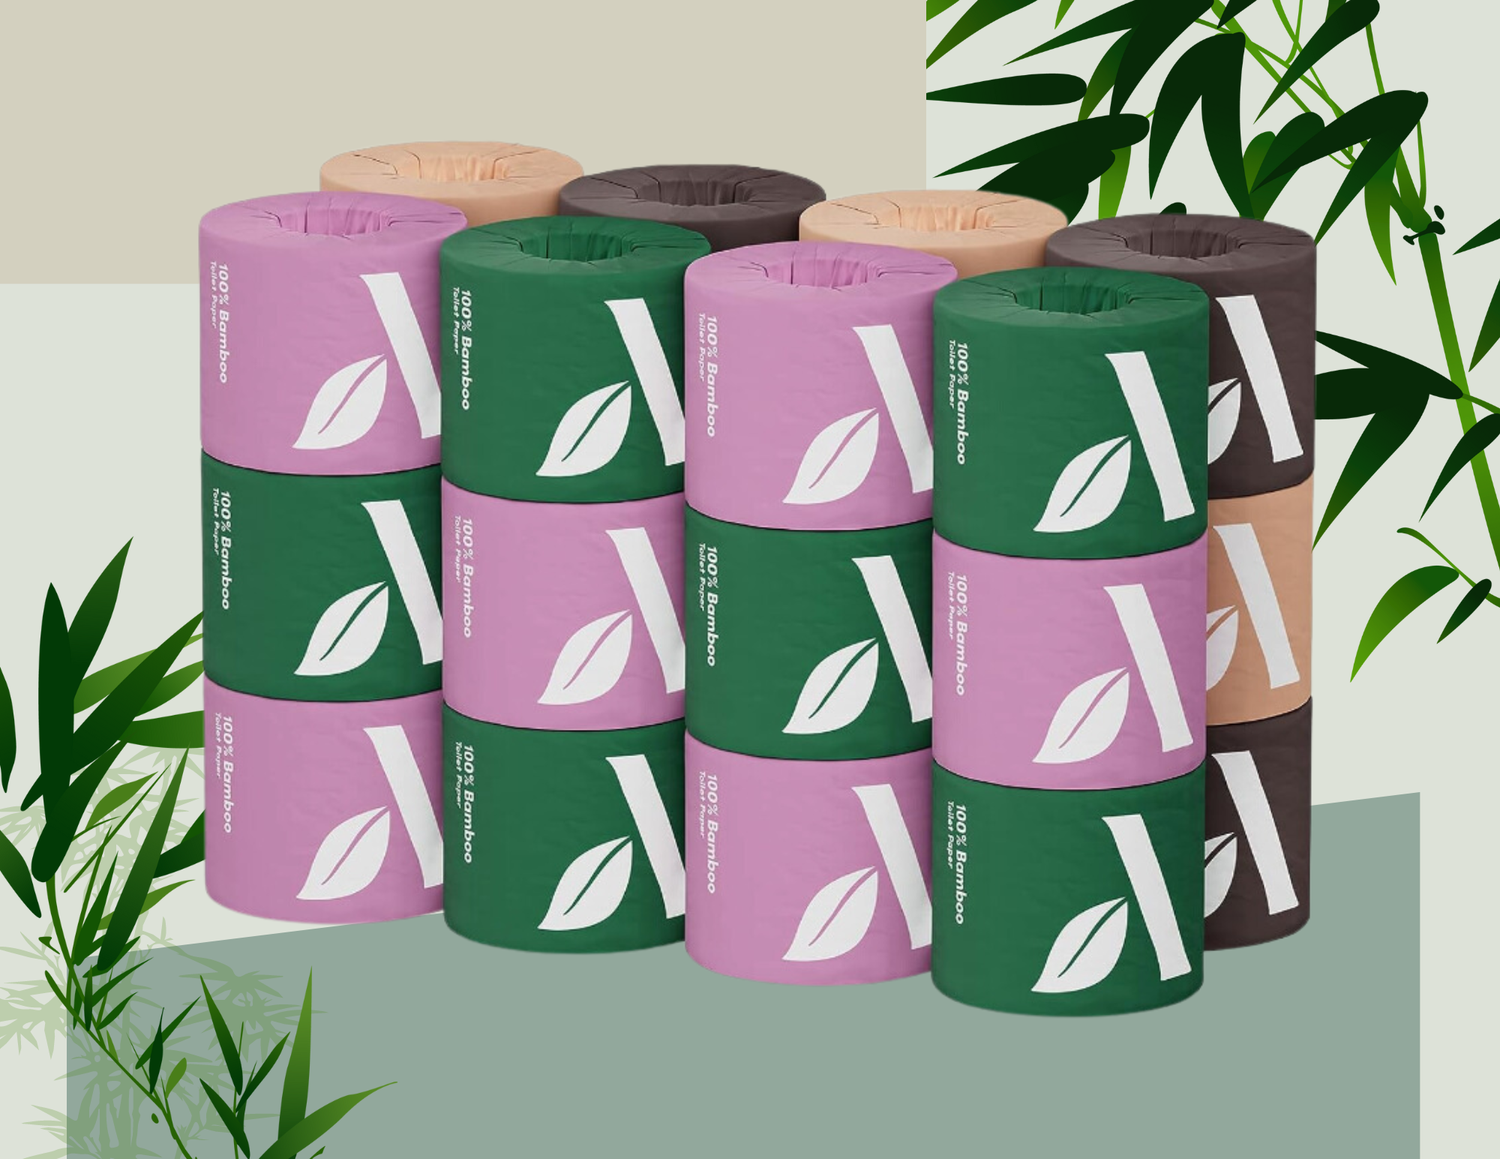 We tried PlantPaper's bamboo toilet paper for a more eco-friendly